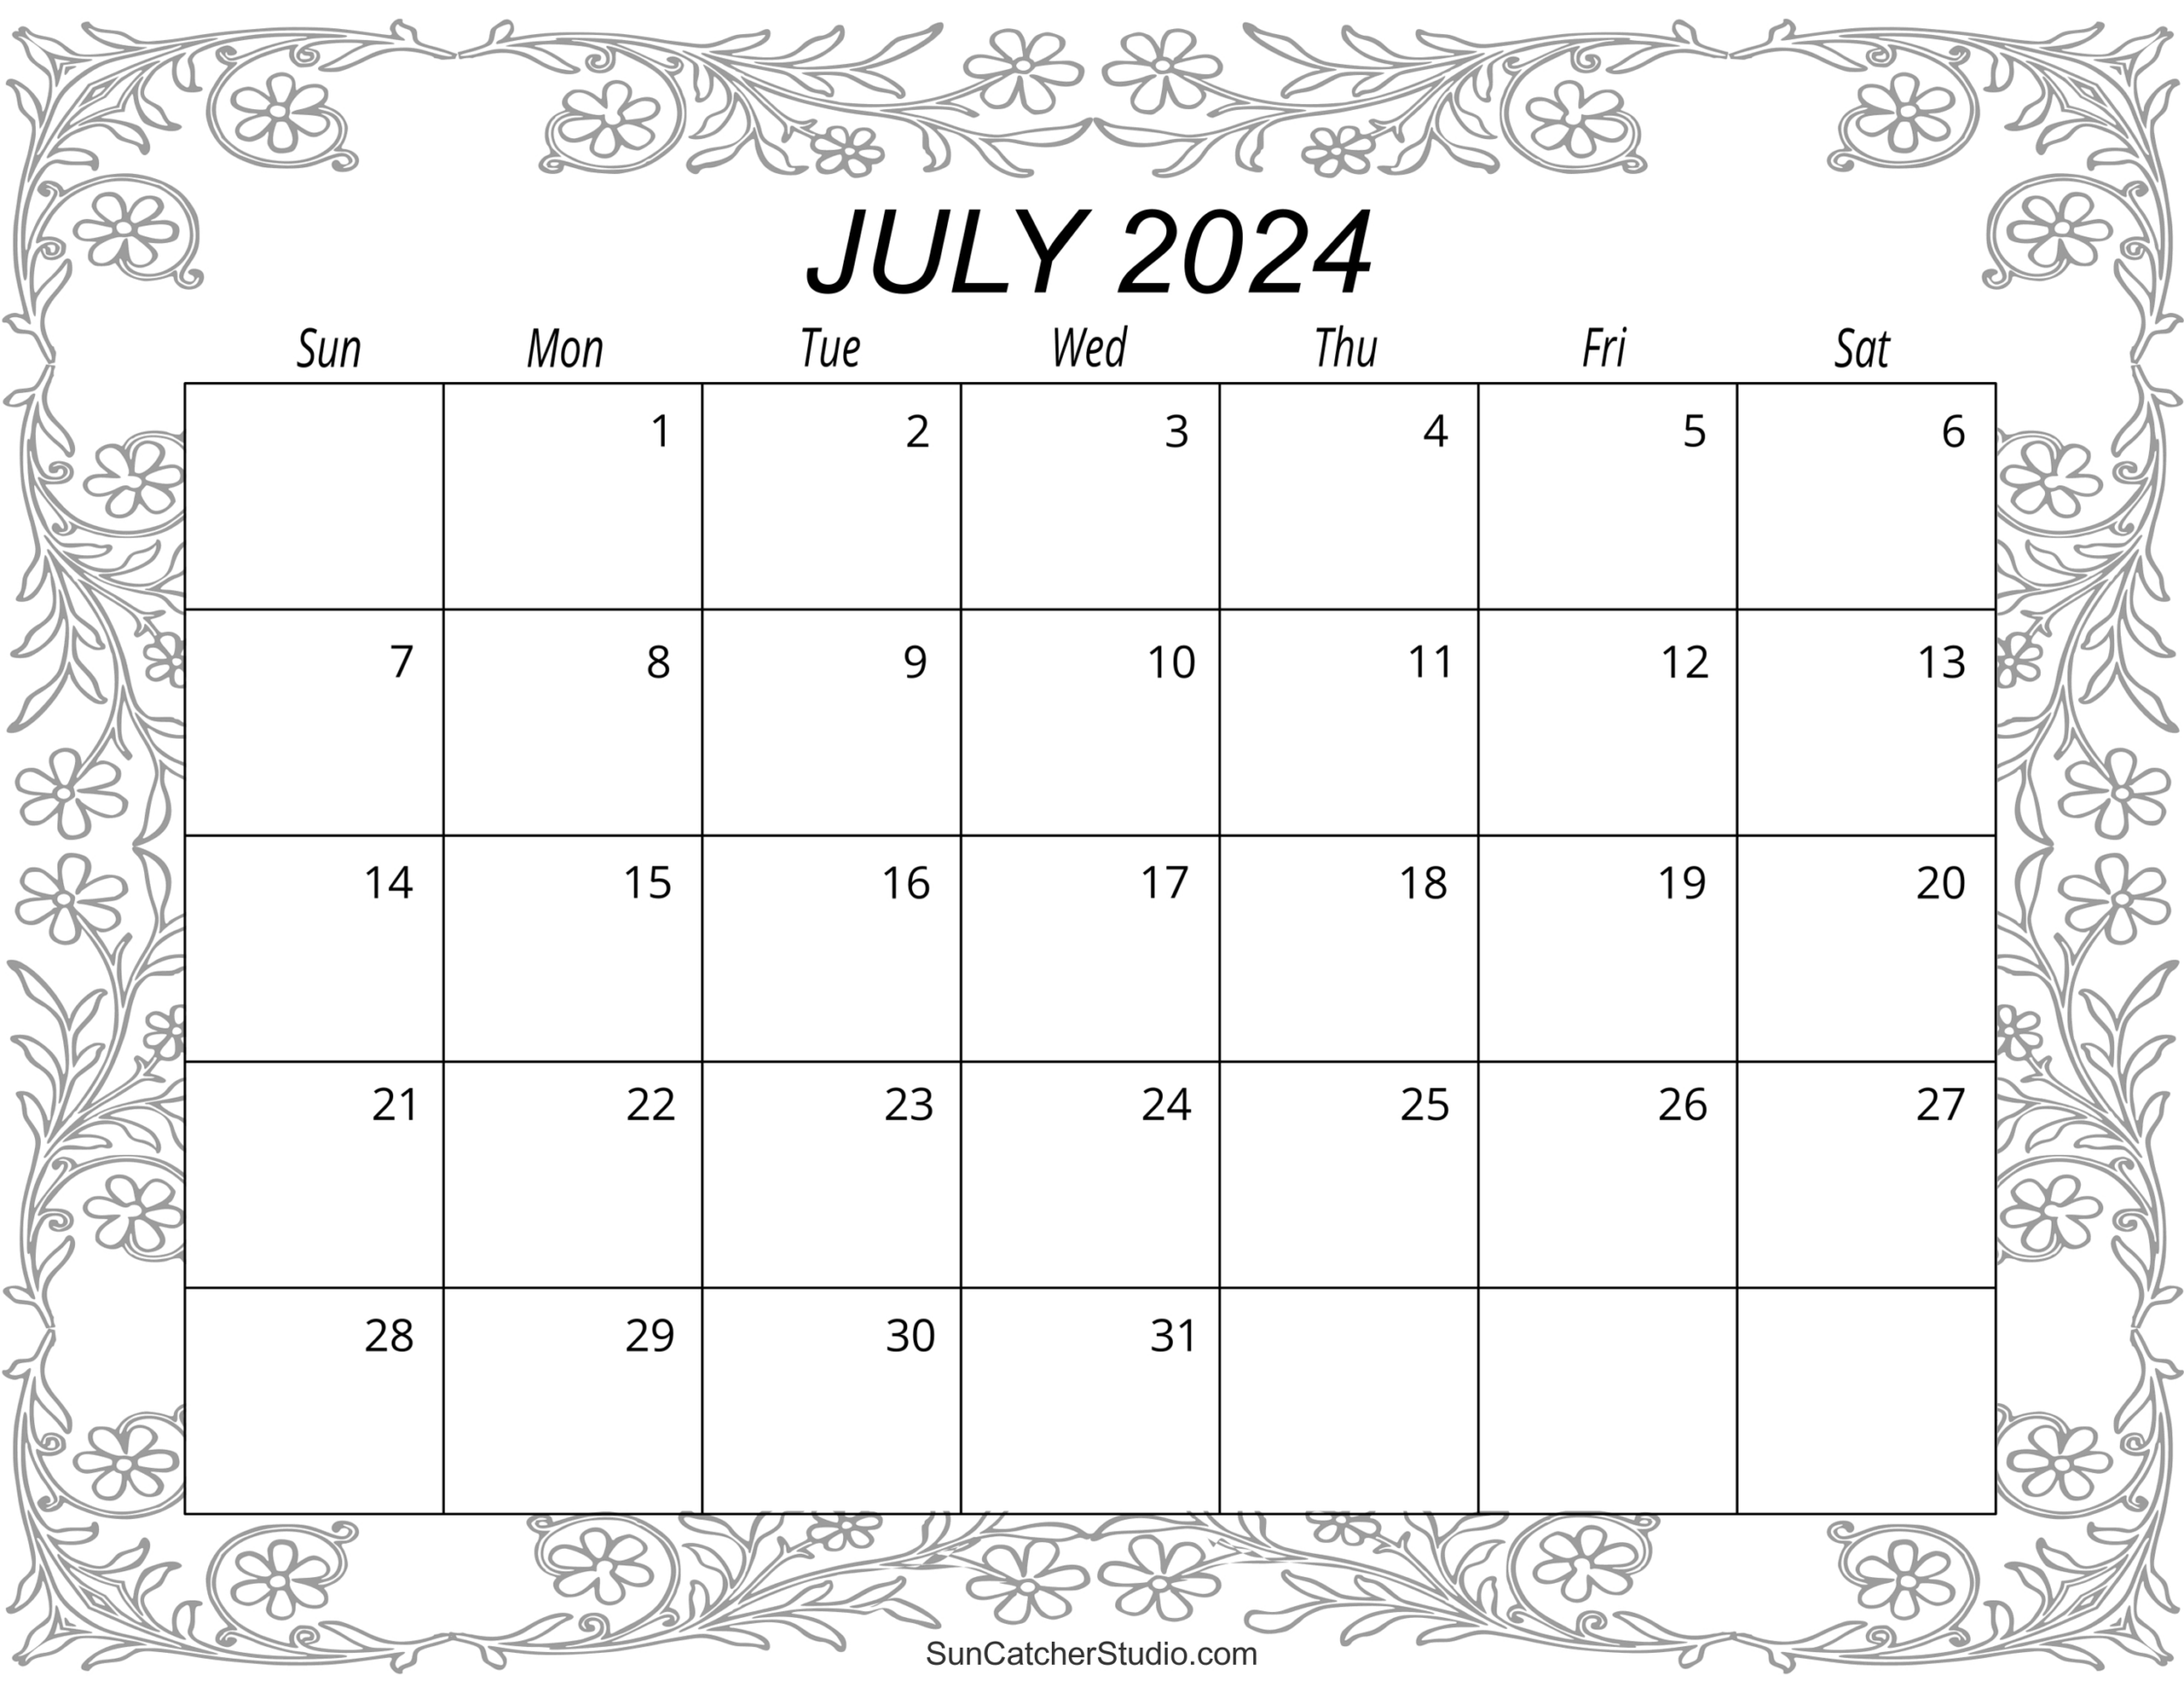 July 2024 Calendar (Free Printable) – Diy Projects, Patterns | July Calendar Coloring Page 2024